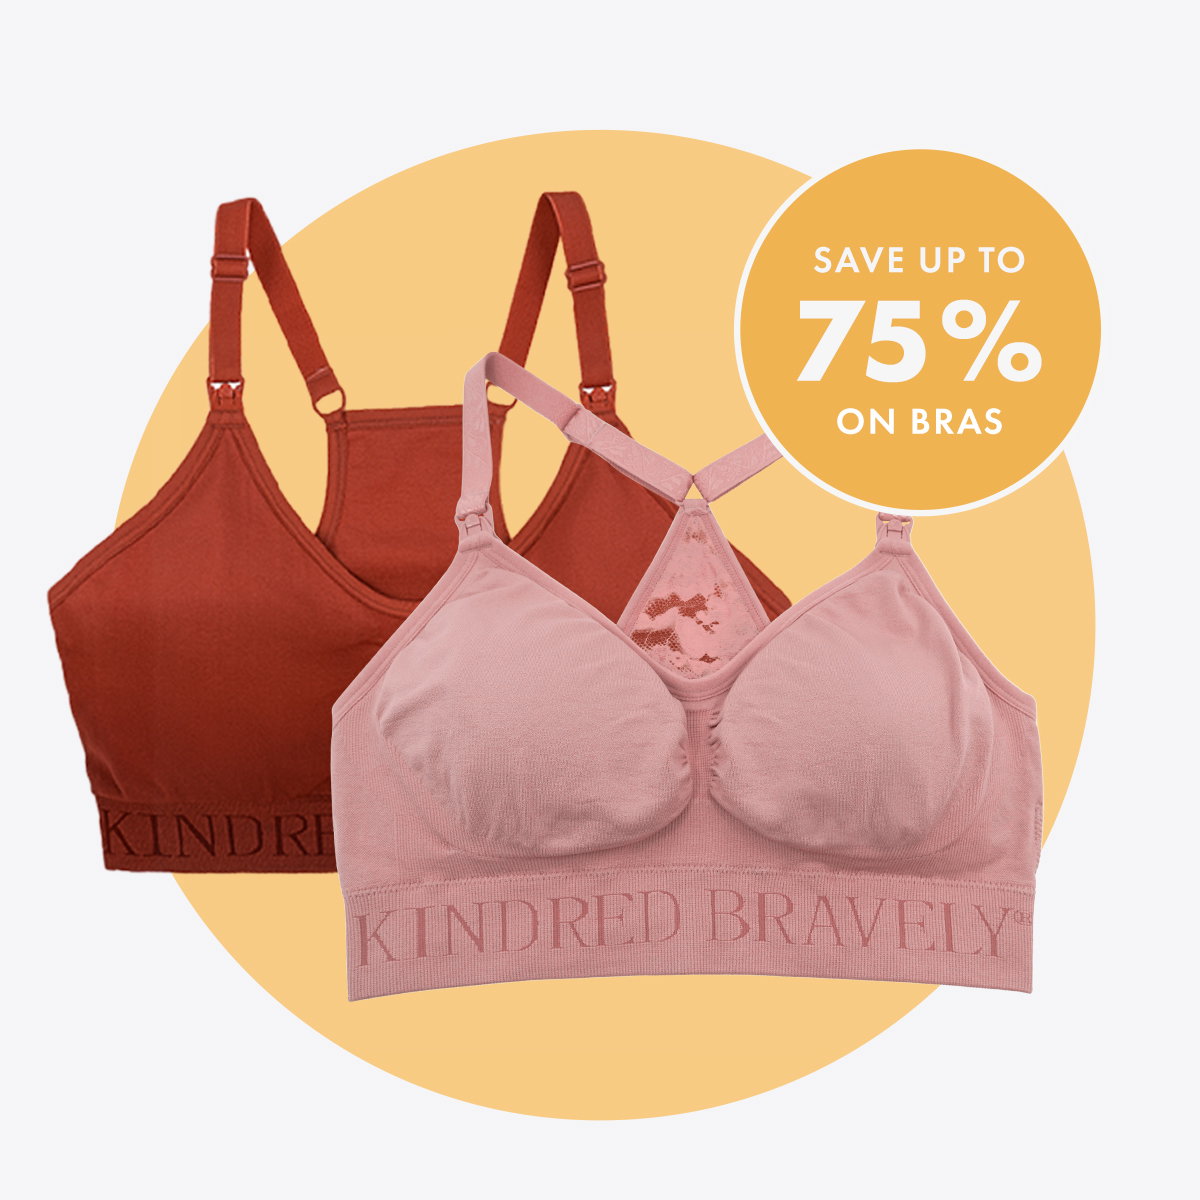 Save BIG on bras & tanks, this weekend only! - Kindred Bravely